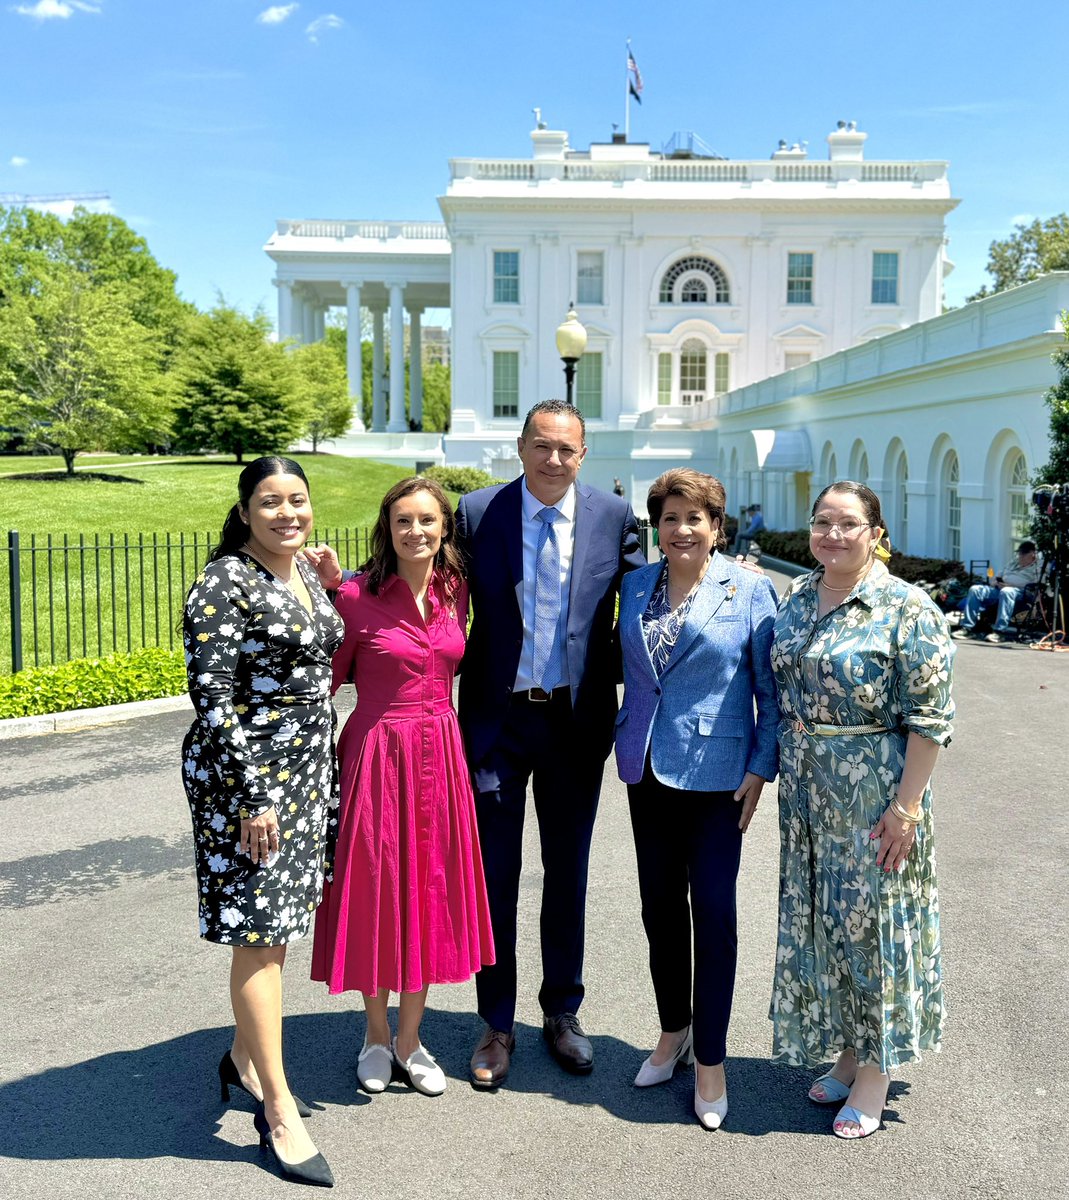 Very good mtg W @POTUS & fellow Latina leaders. We talked abt accomplishments & continued efforts 2 open economic opportunity & advance key Latino priorities, including more outreach 2 our community. We look frw 2 keep fighting extremism & strengthening democracy @MiFamiliaVota